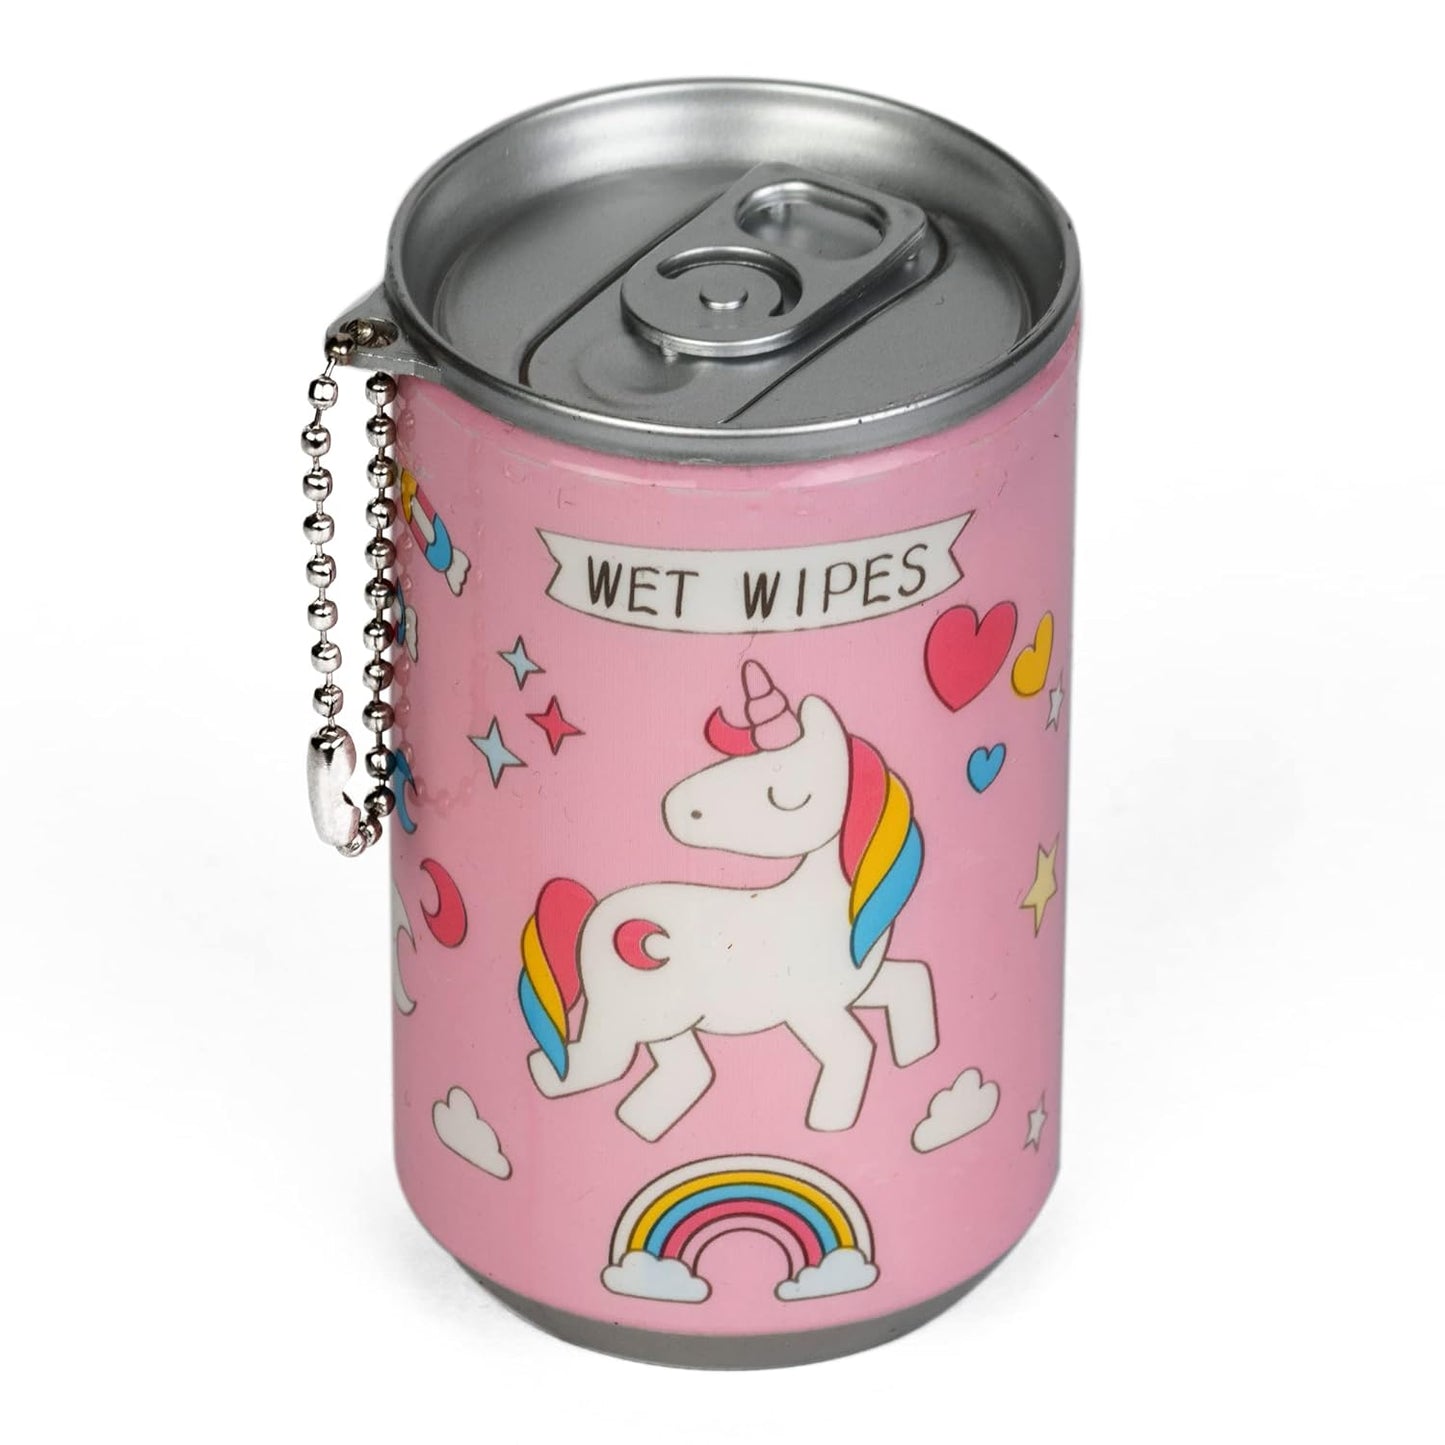 ART & CRAFT Cute Funky Unicorn Tin Shape Mini Wet Wipes Tissue, Extremely Portable Tin Cream/Pink Color (PACK OF 1)